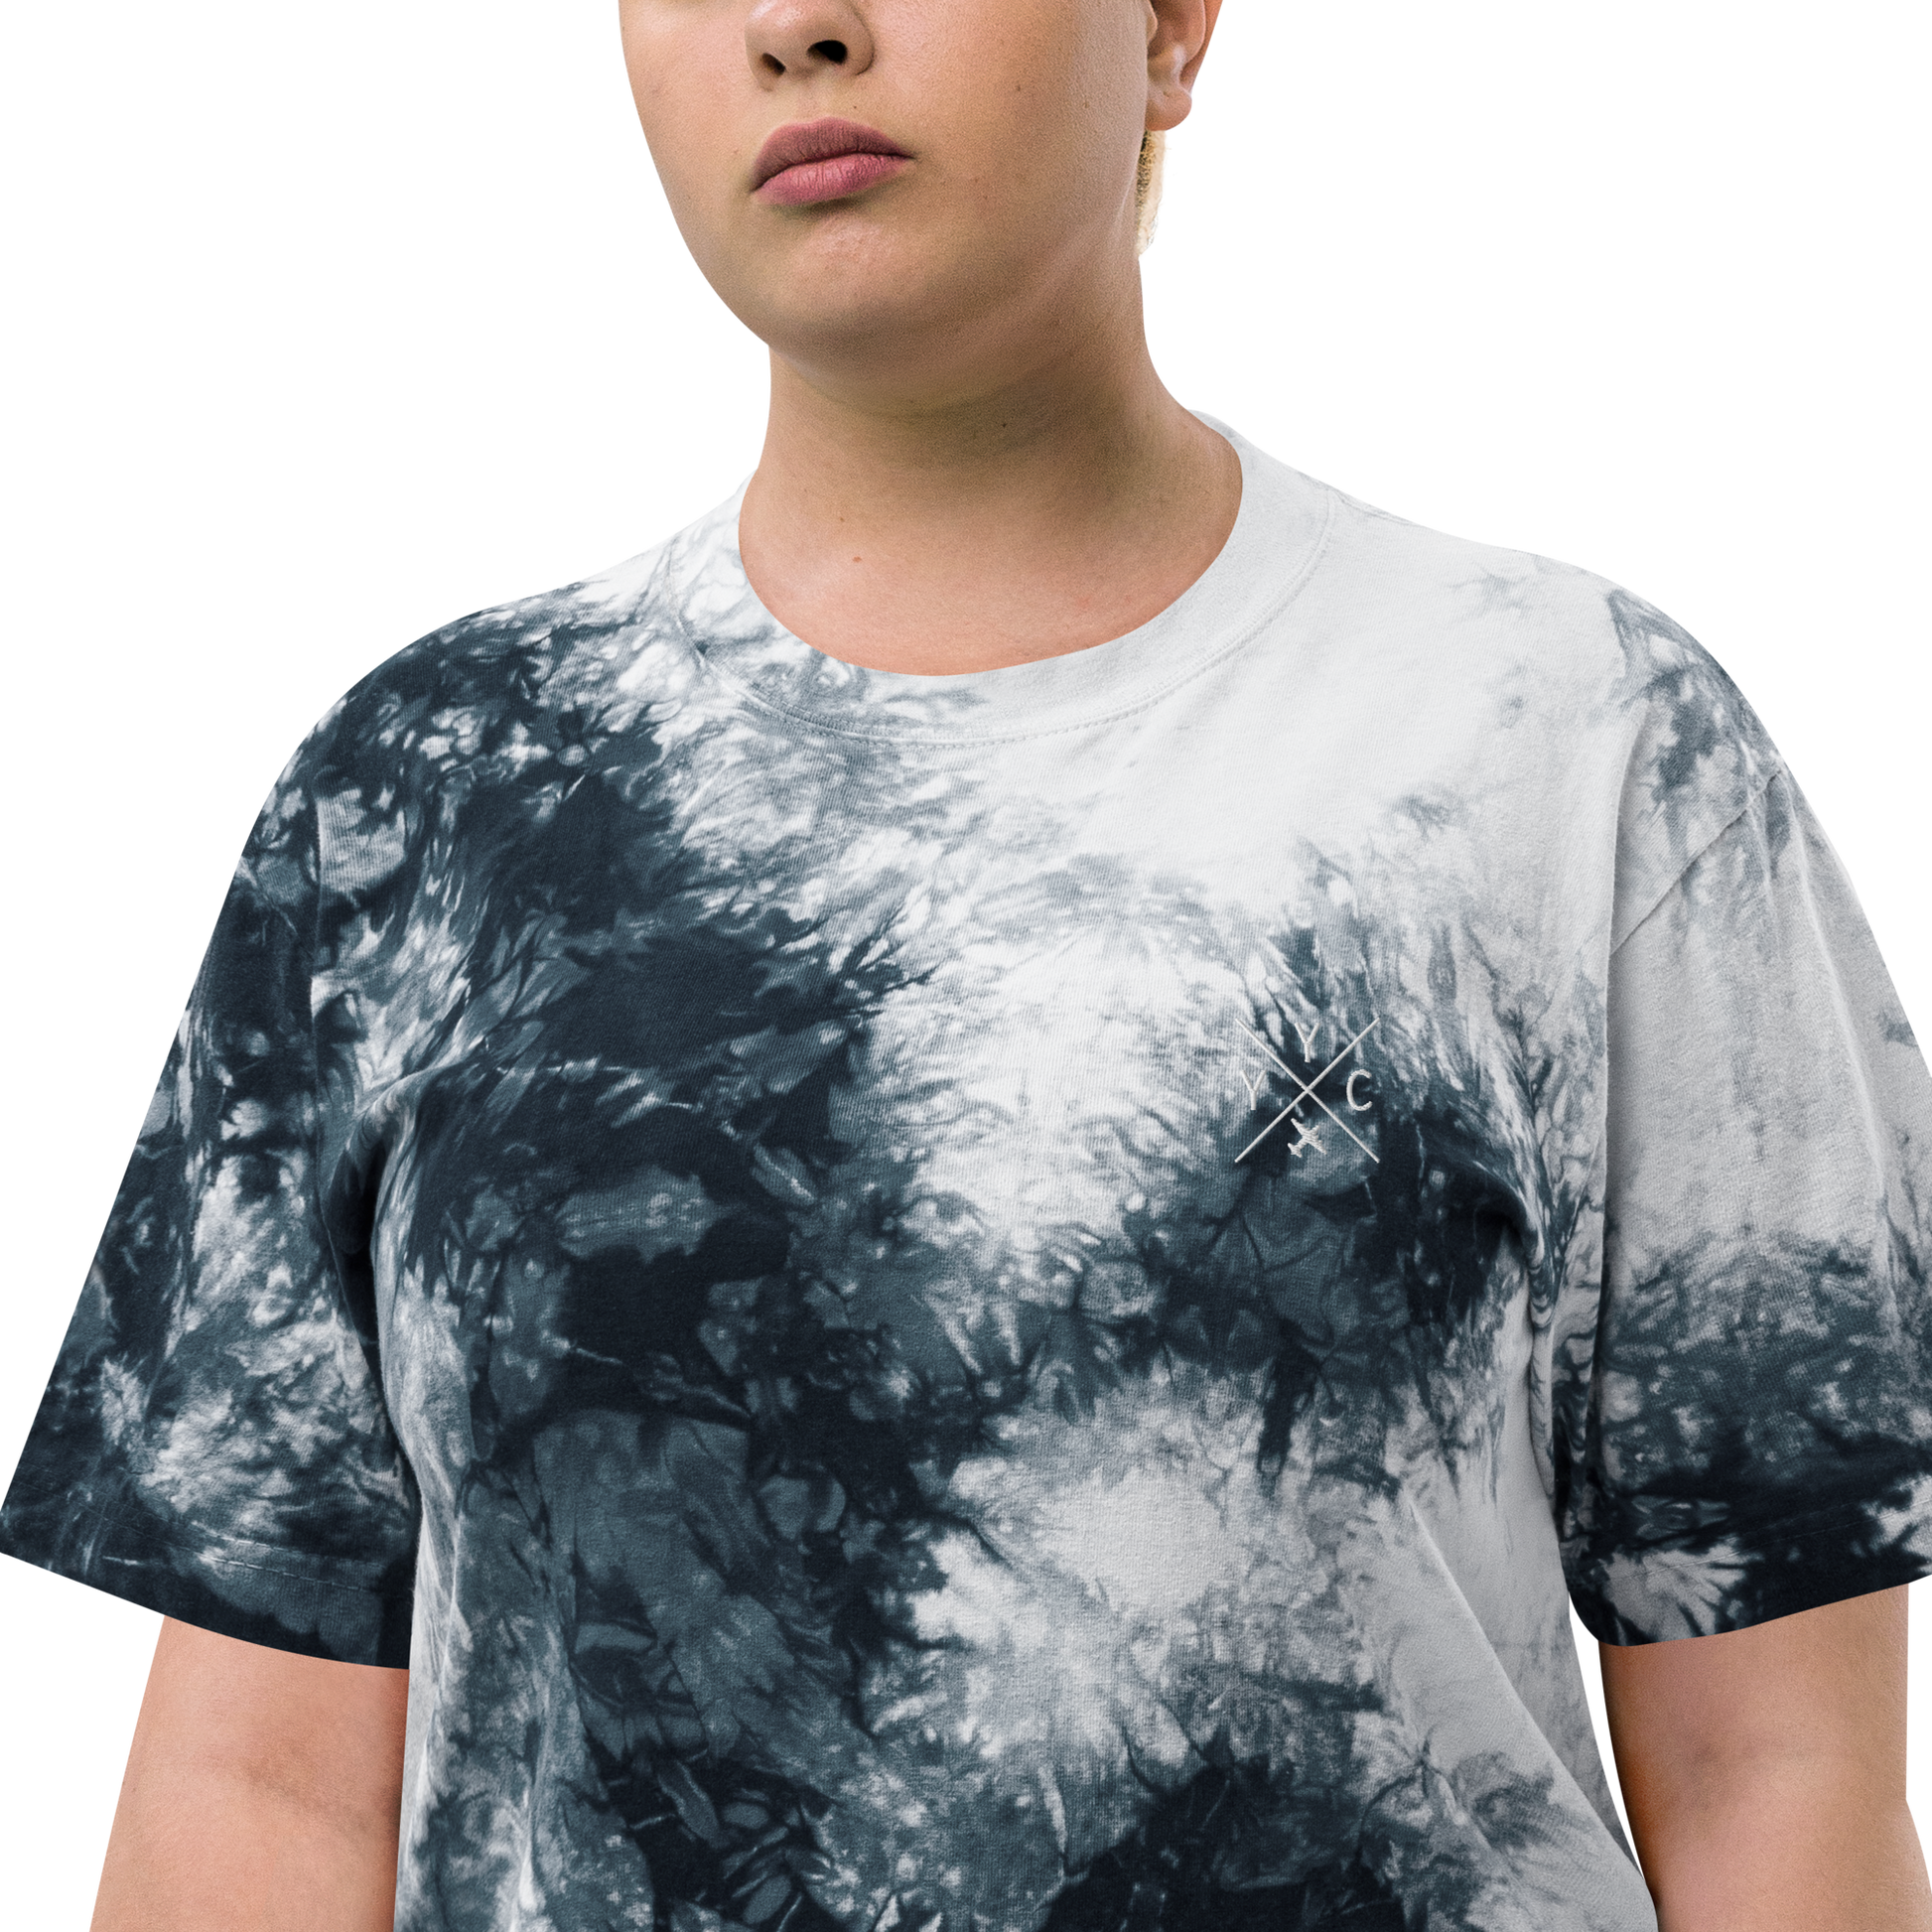 YHM Designs - YYC Calgary Oversized Tie-Dye T-Shirt - Crossed-X Design with Airport Code and Vintage Propliner - White Embroidery - Image 18